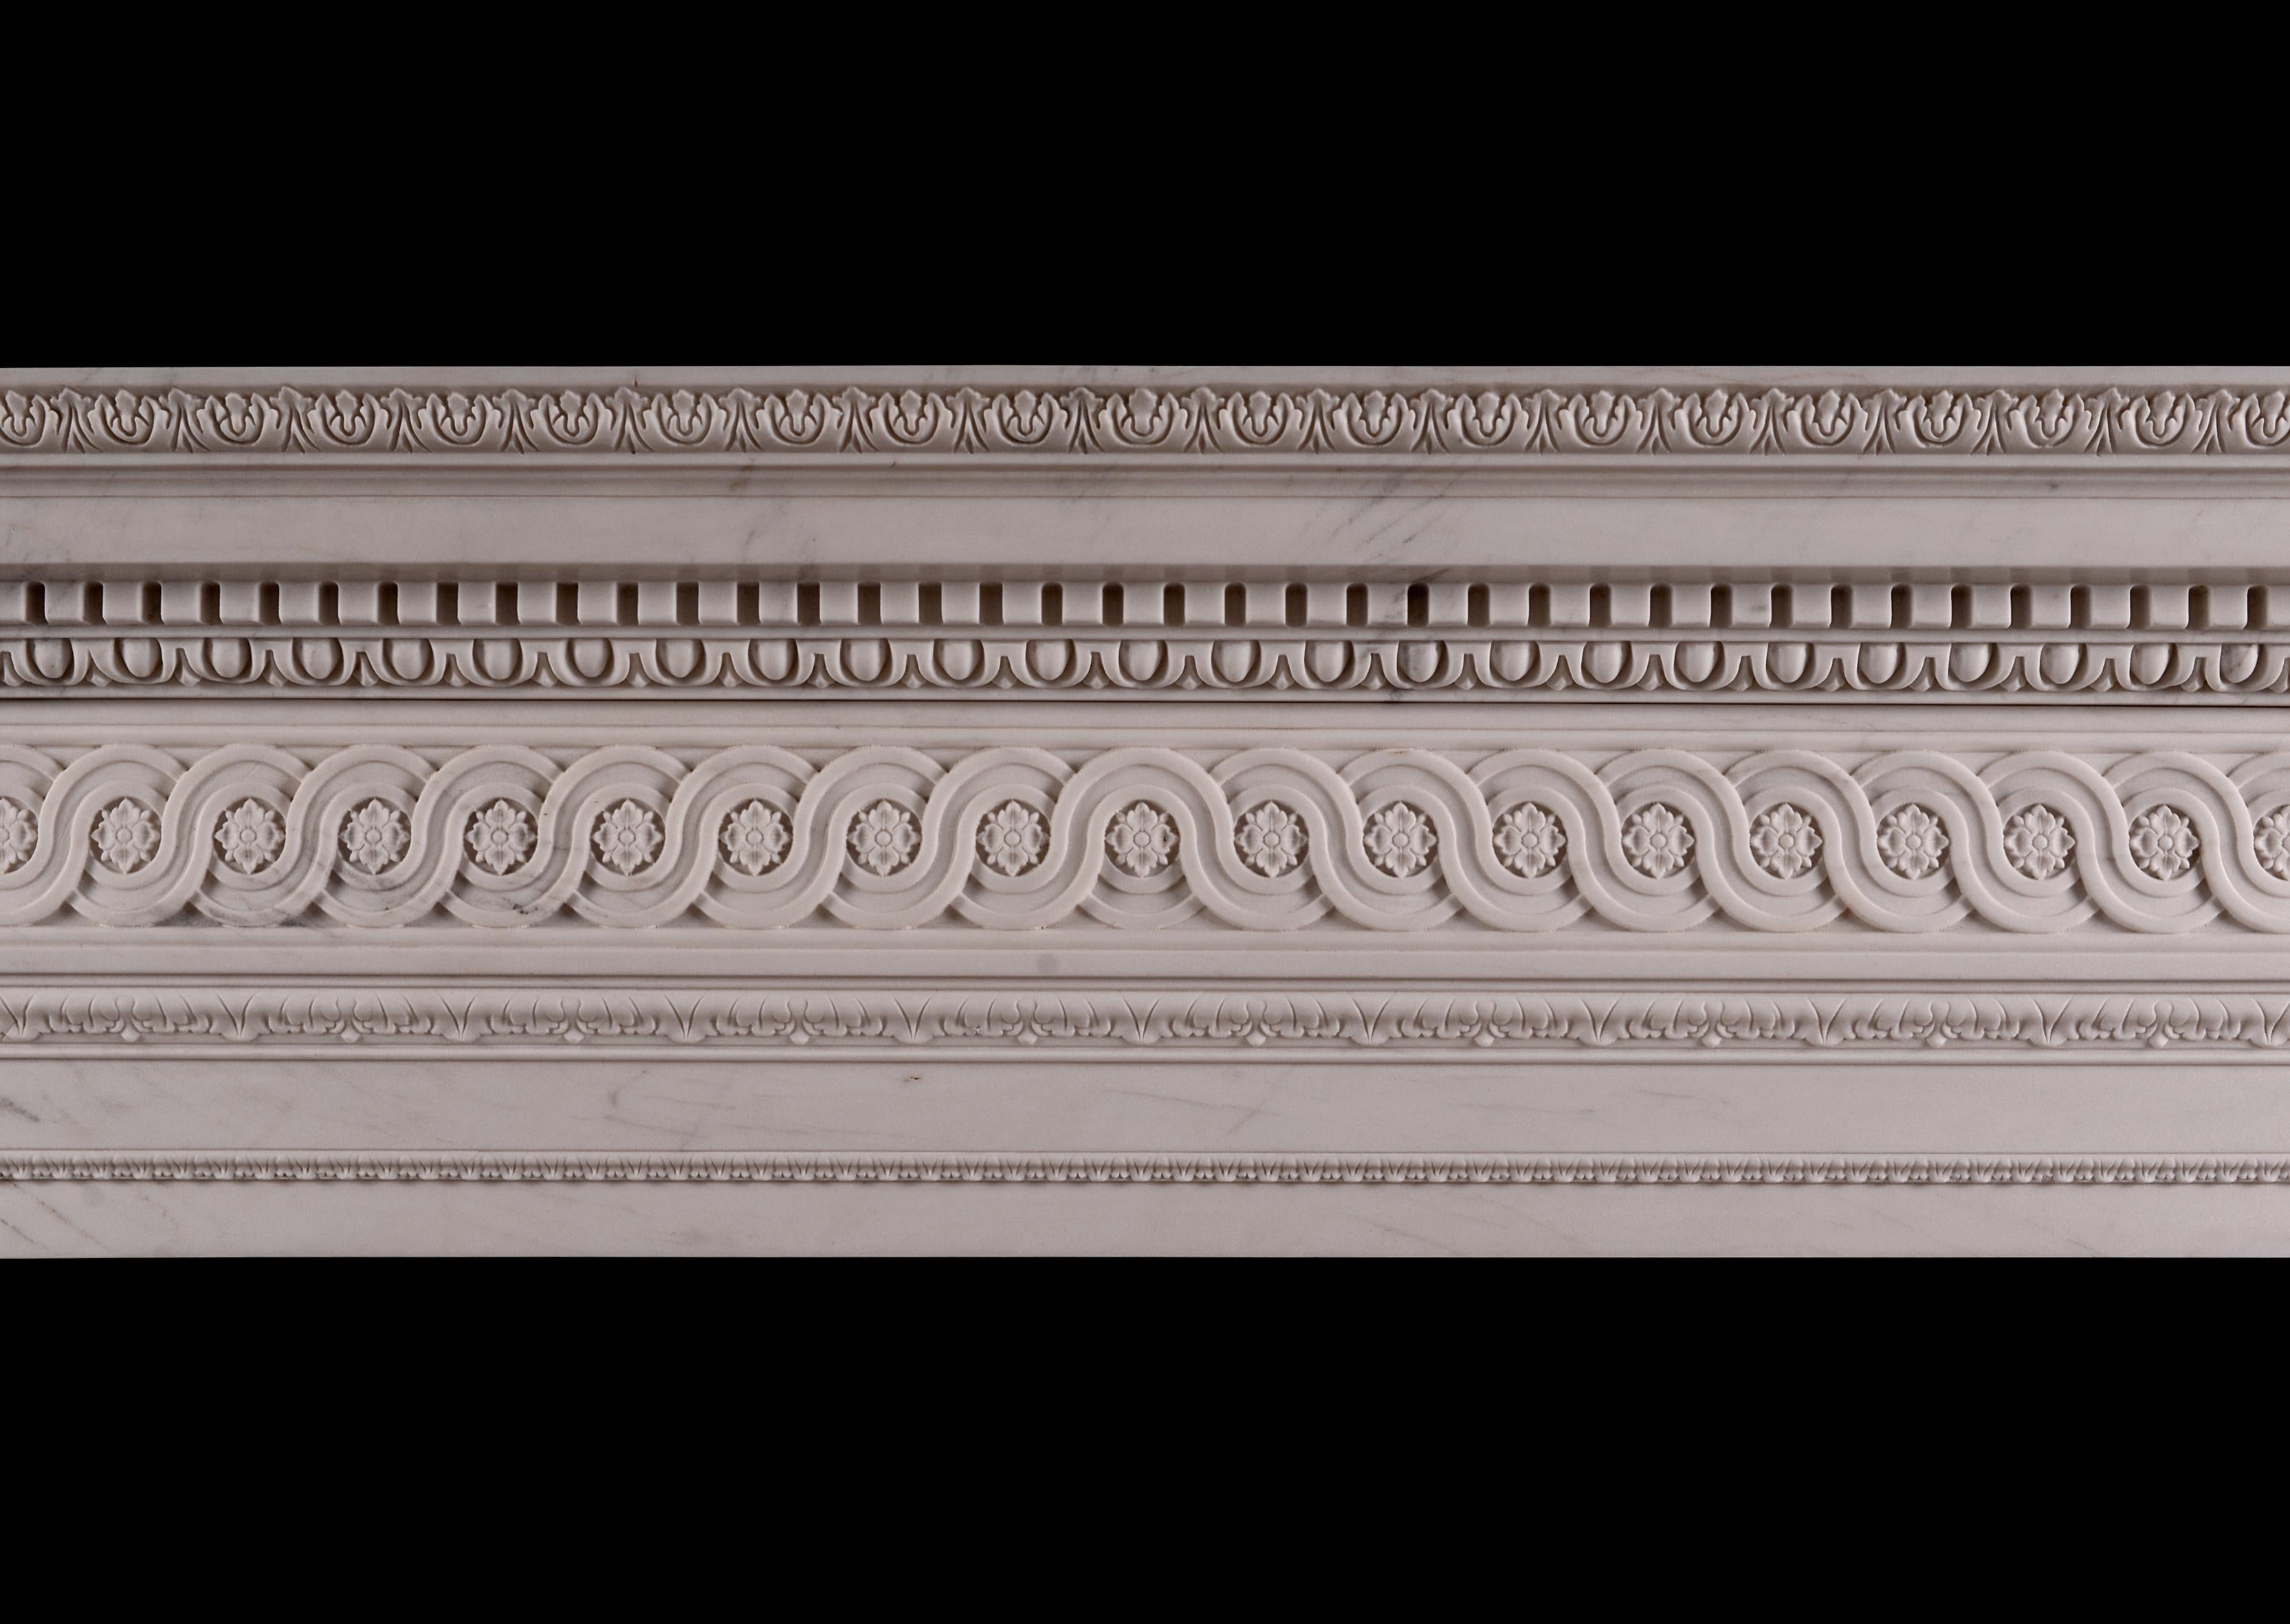 A late Georgian style fireplace carved in white marble. The jambs and frieze ornamented with a continuous band of guilloche enclosing rosettes and carved leaf mouldings. The shelf with acanthus leaf, egg and dart and dentil detailings. Based on a